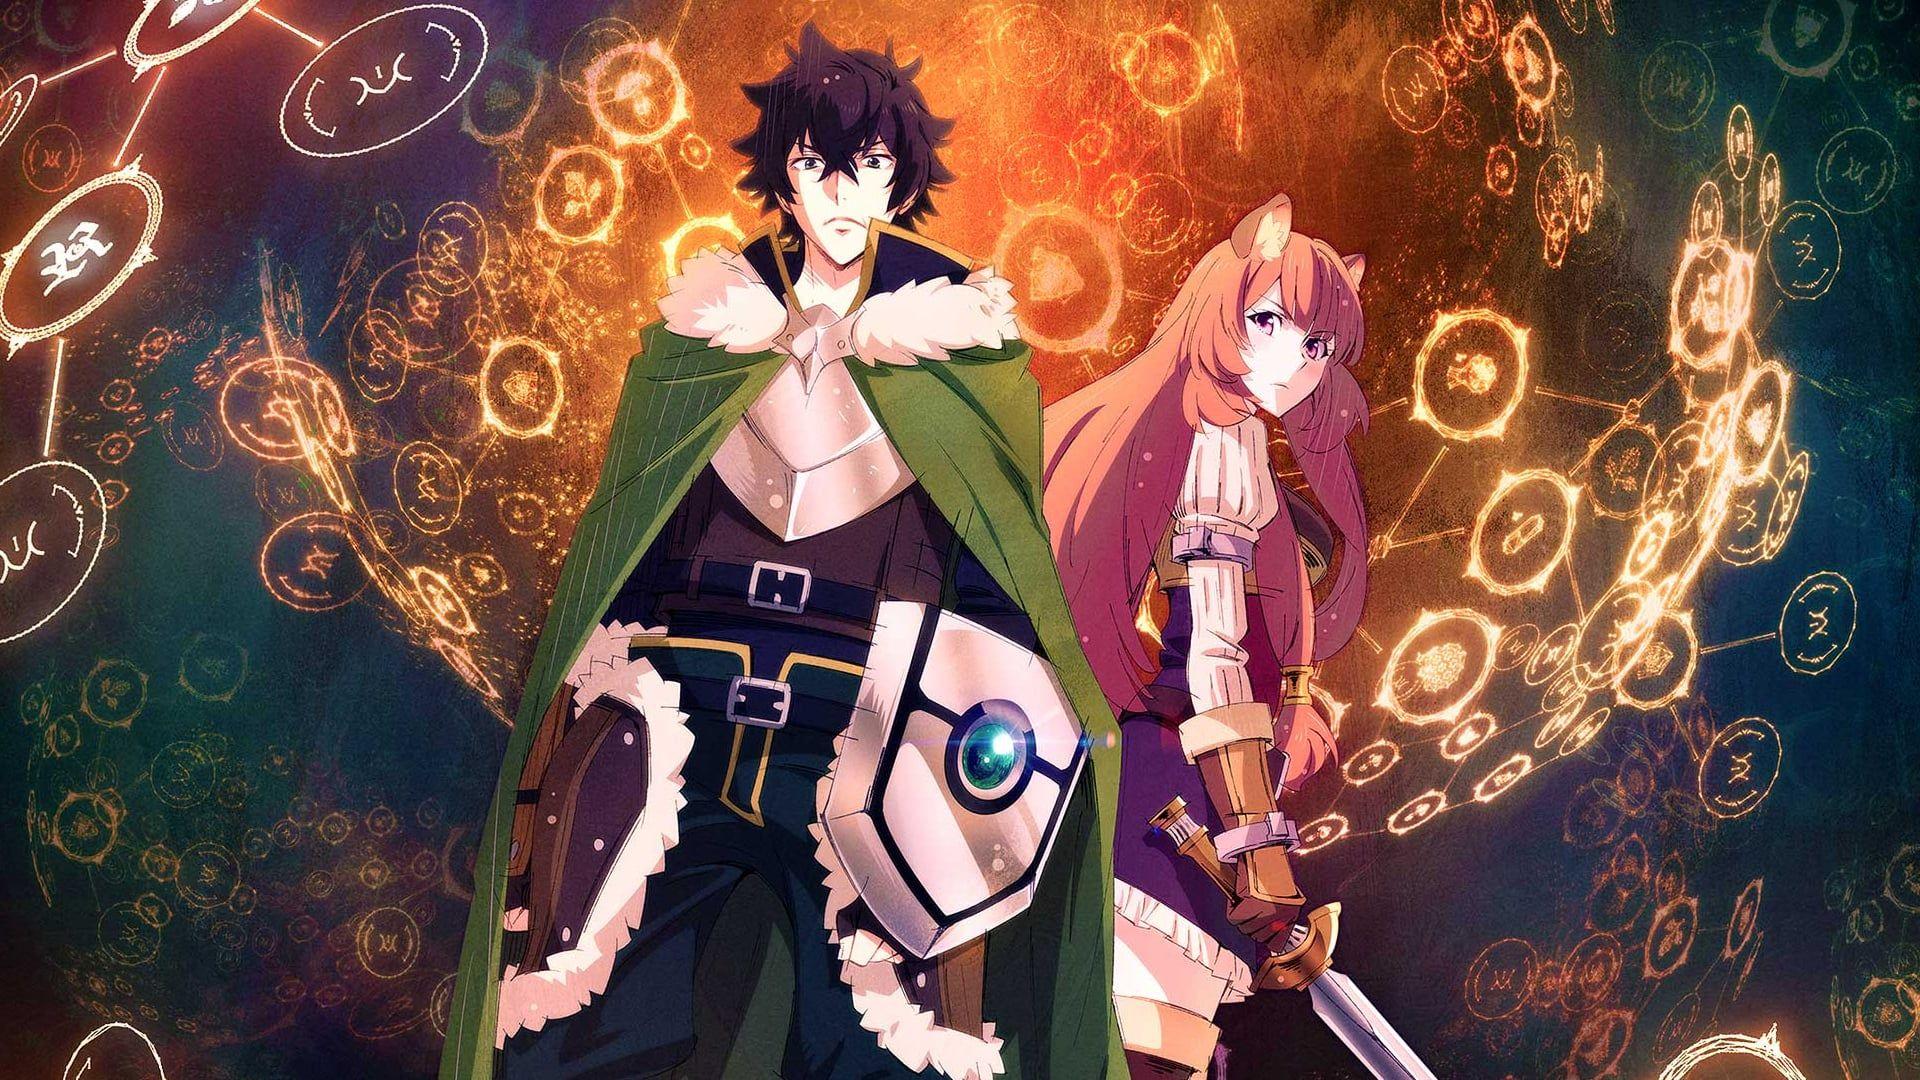 The Rising Of The Shield Hero Wallpaper HD. Anime episodes